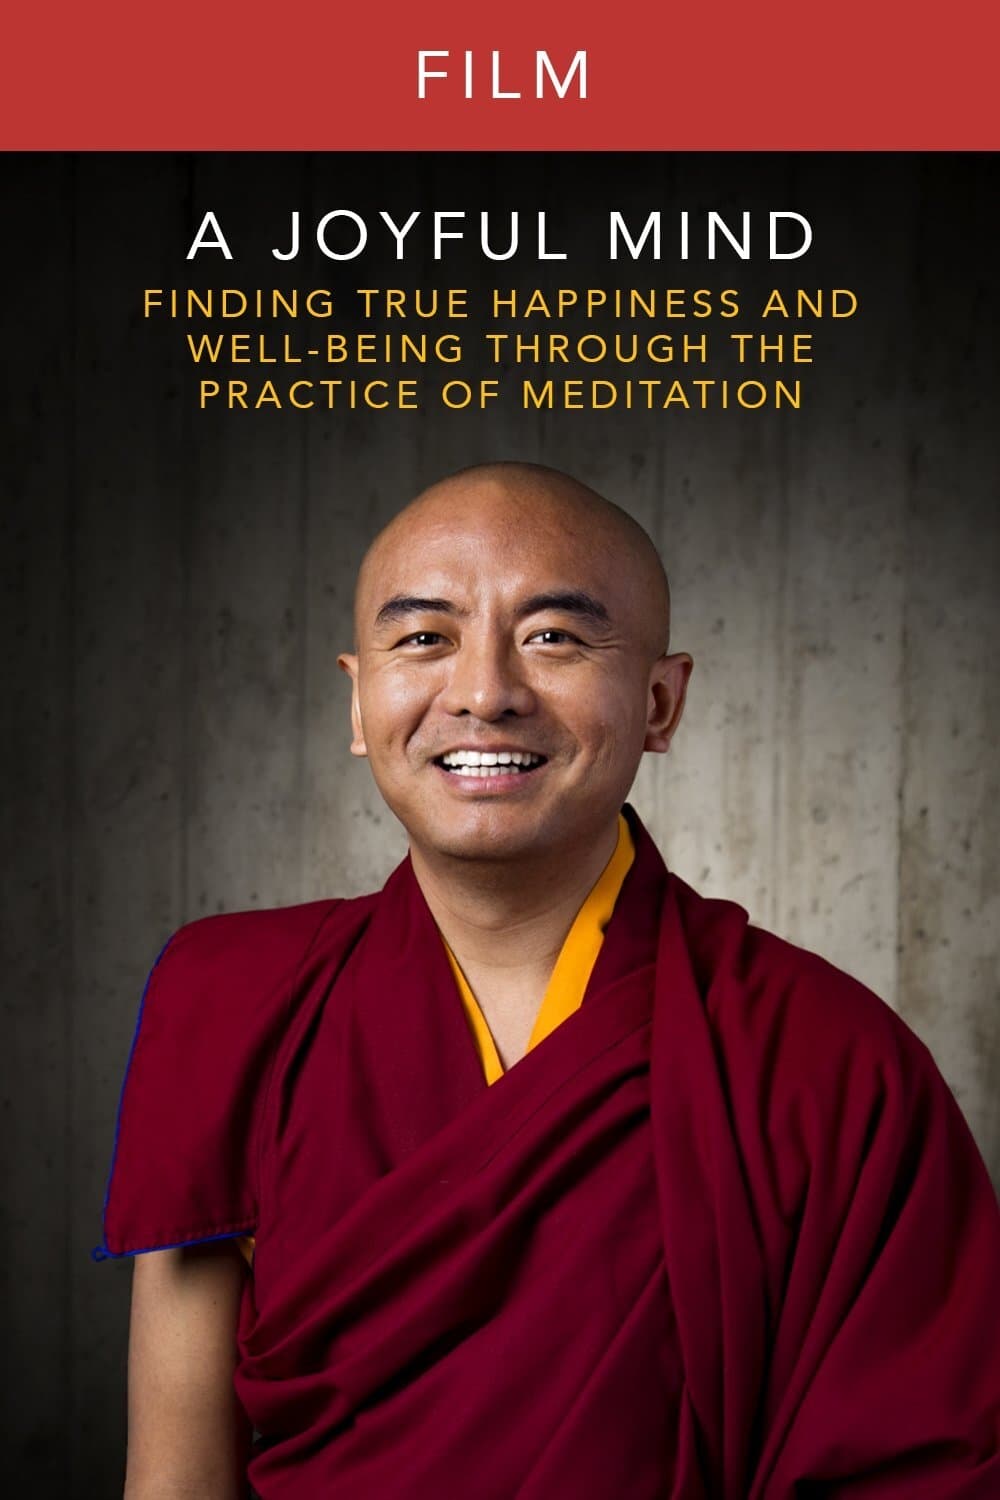 A Joyful Mind - Finding true happiness through the practice of meditation